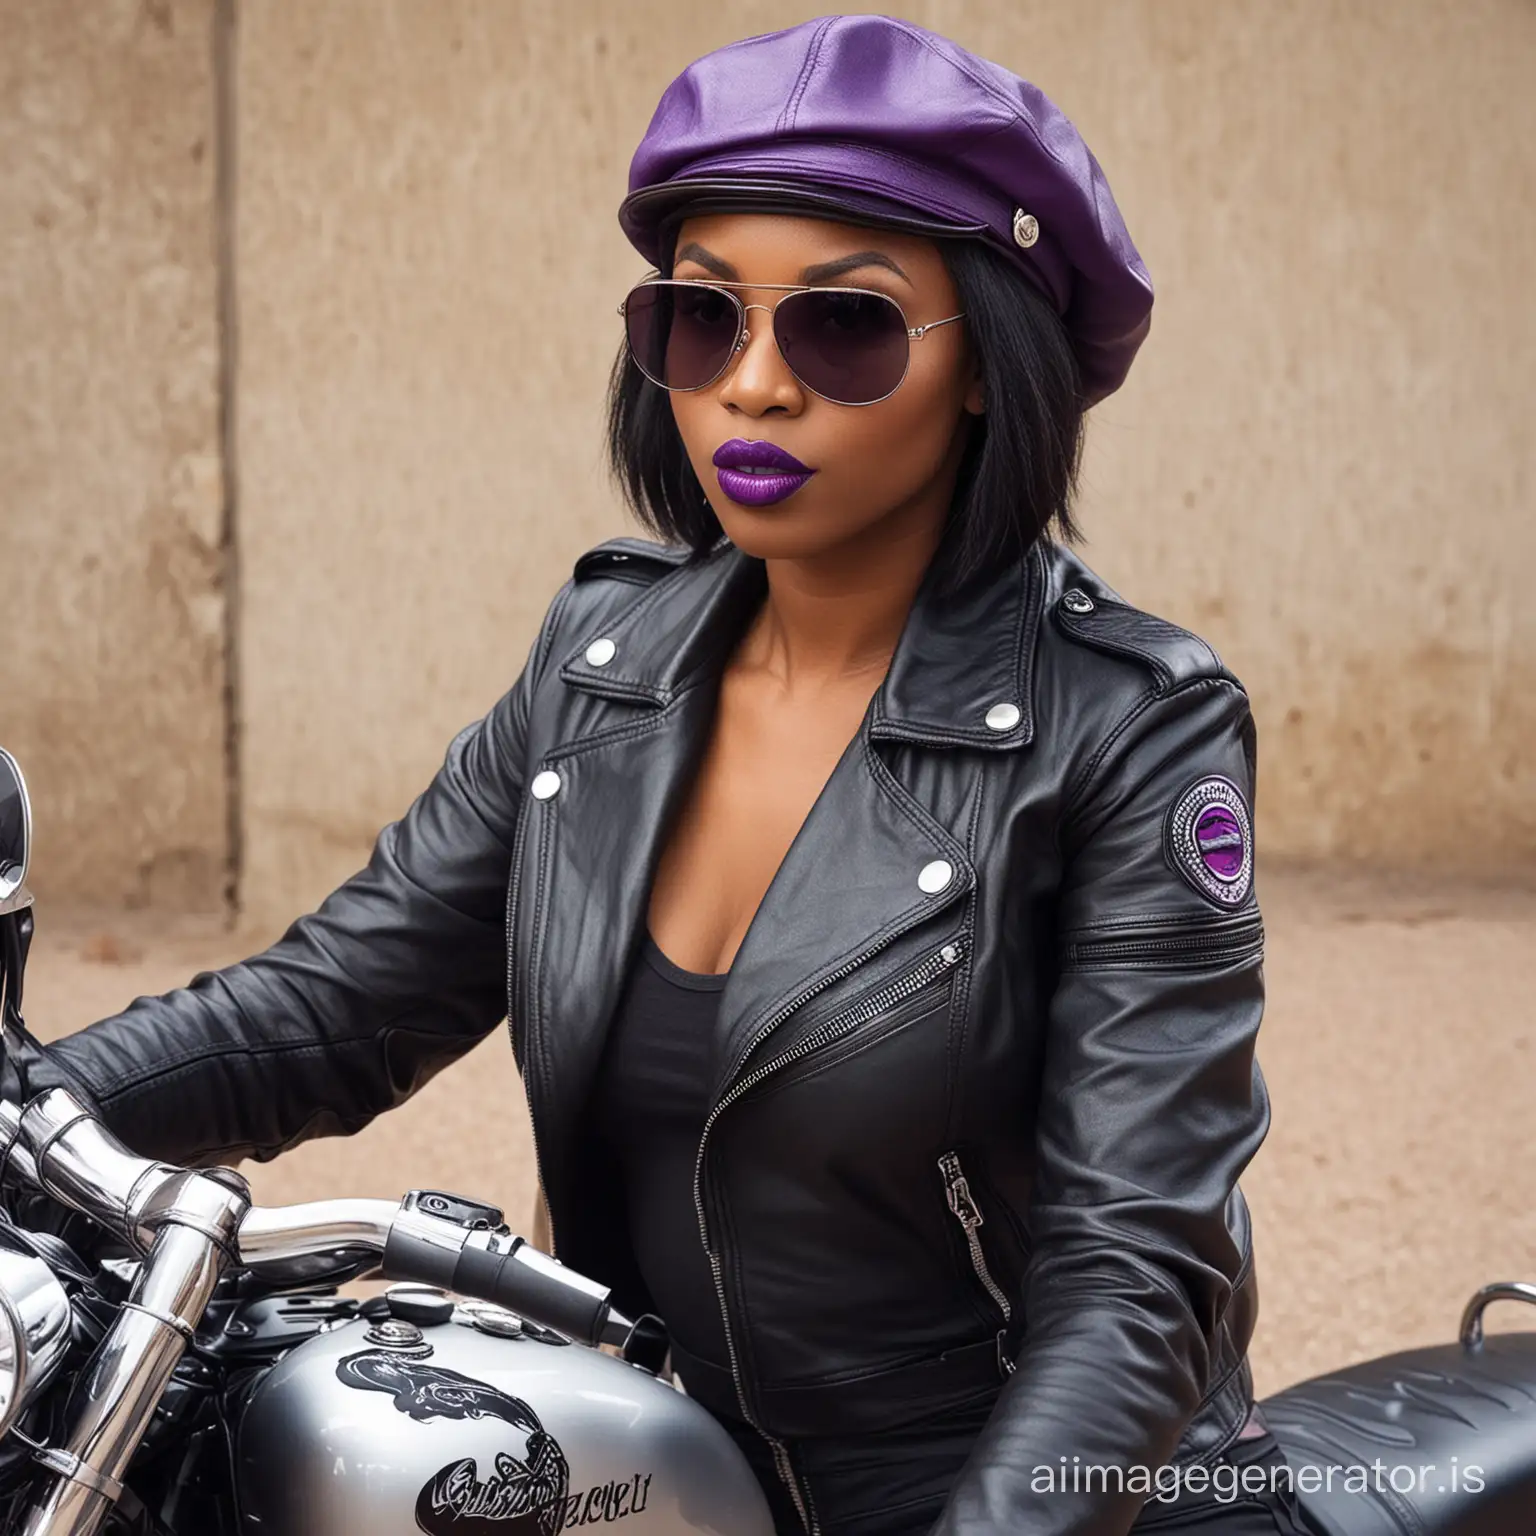 African-Motorcycle-Rider-in-Purple-Lipstick-with-Leather-Cap-and-Sunglasses